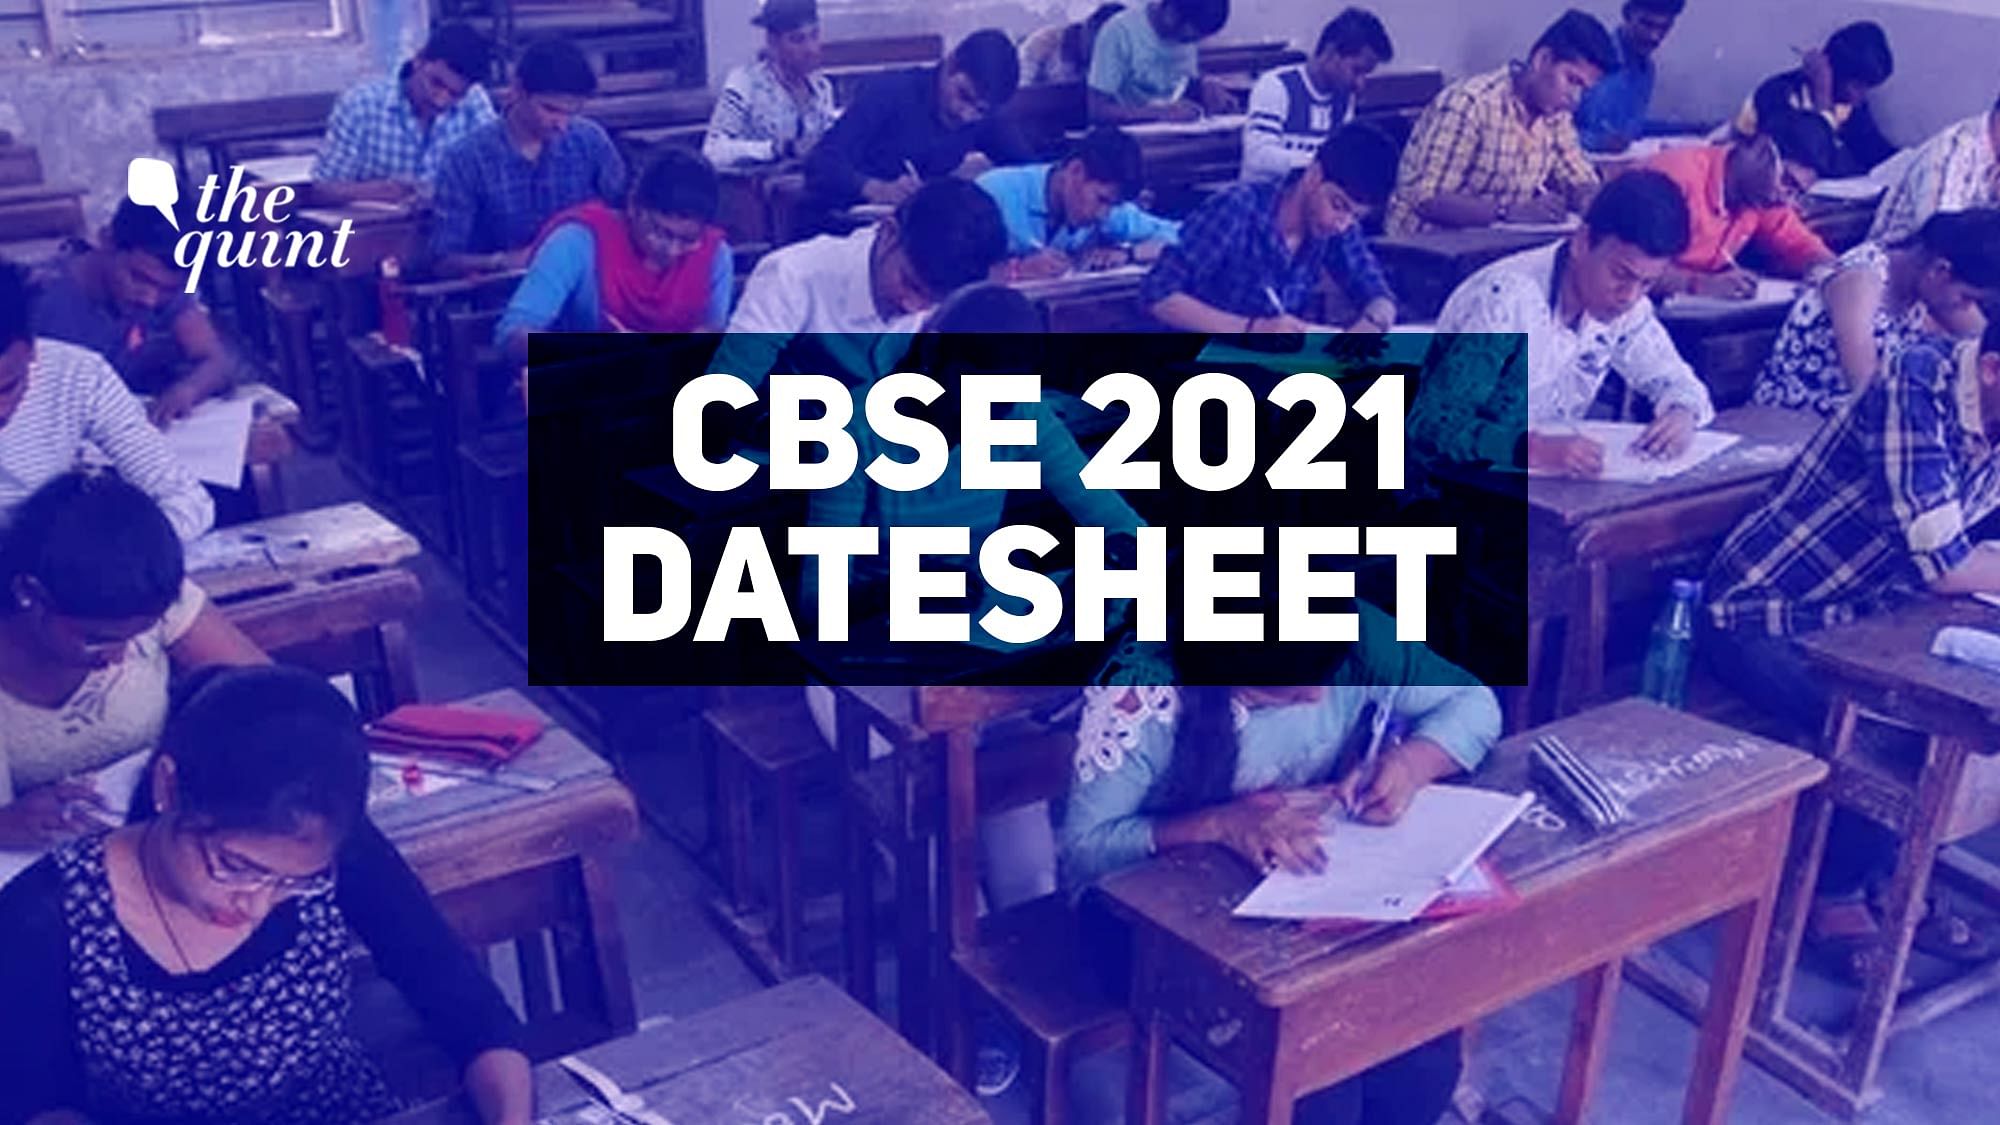 CBSE has released the datesheet for class 10 and 12 board exams.&nbsp;